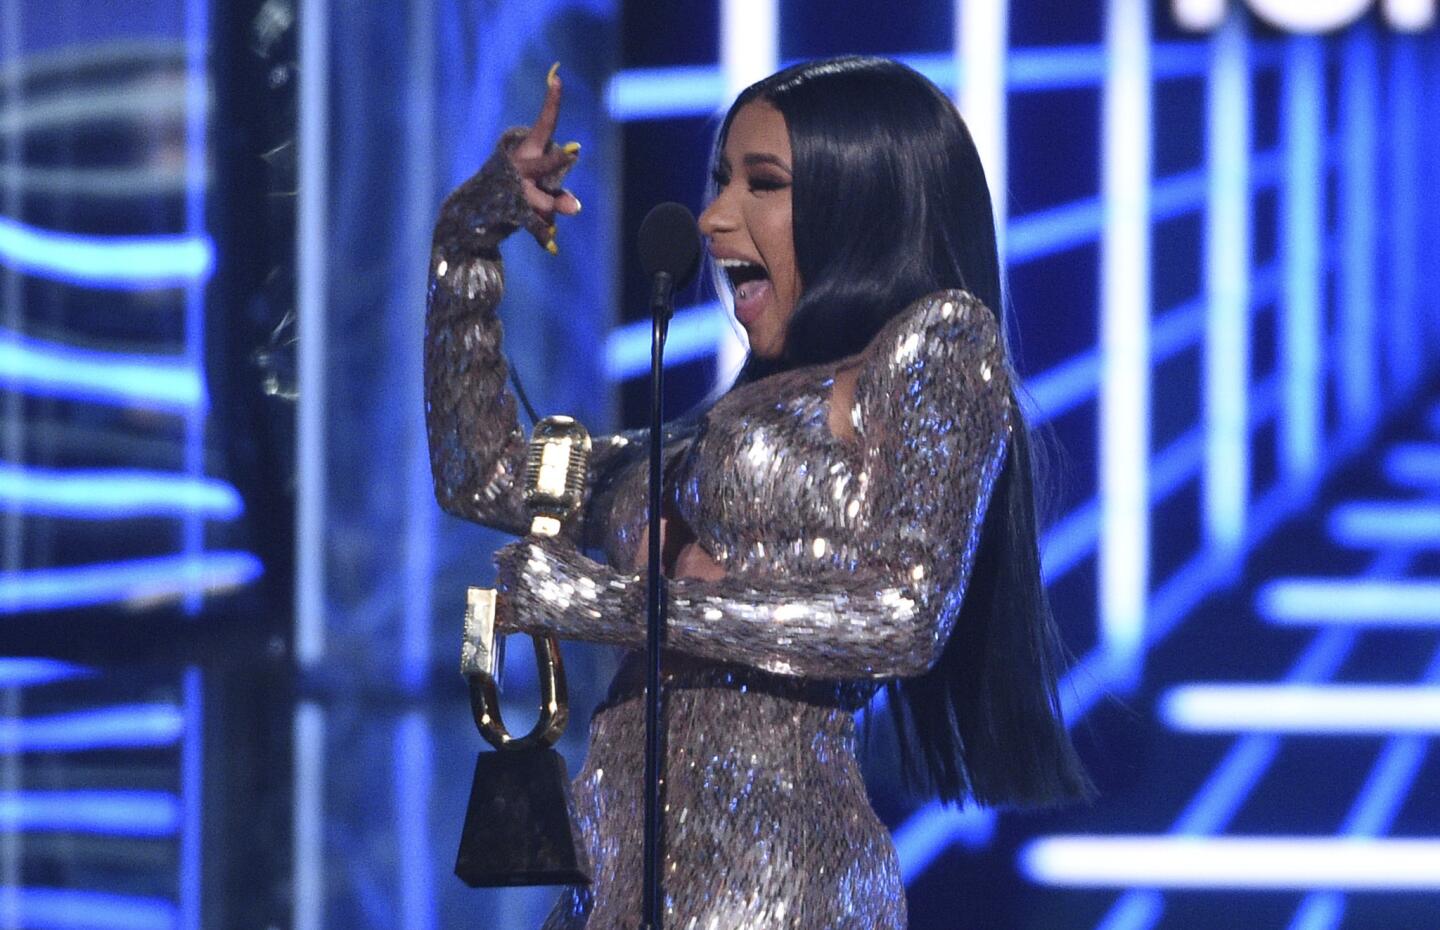 Cardi B accepts the top rap song award for "I Like It" at the Billboard Music Awards on May 1, 2019, at the MGM Grand Garden Arena in Las Vegas.